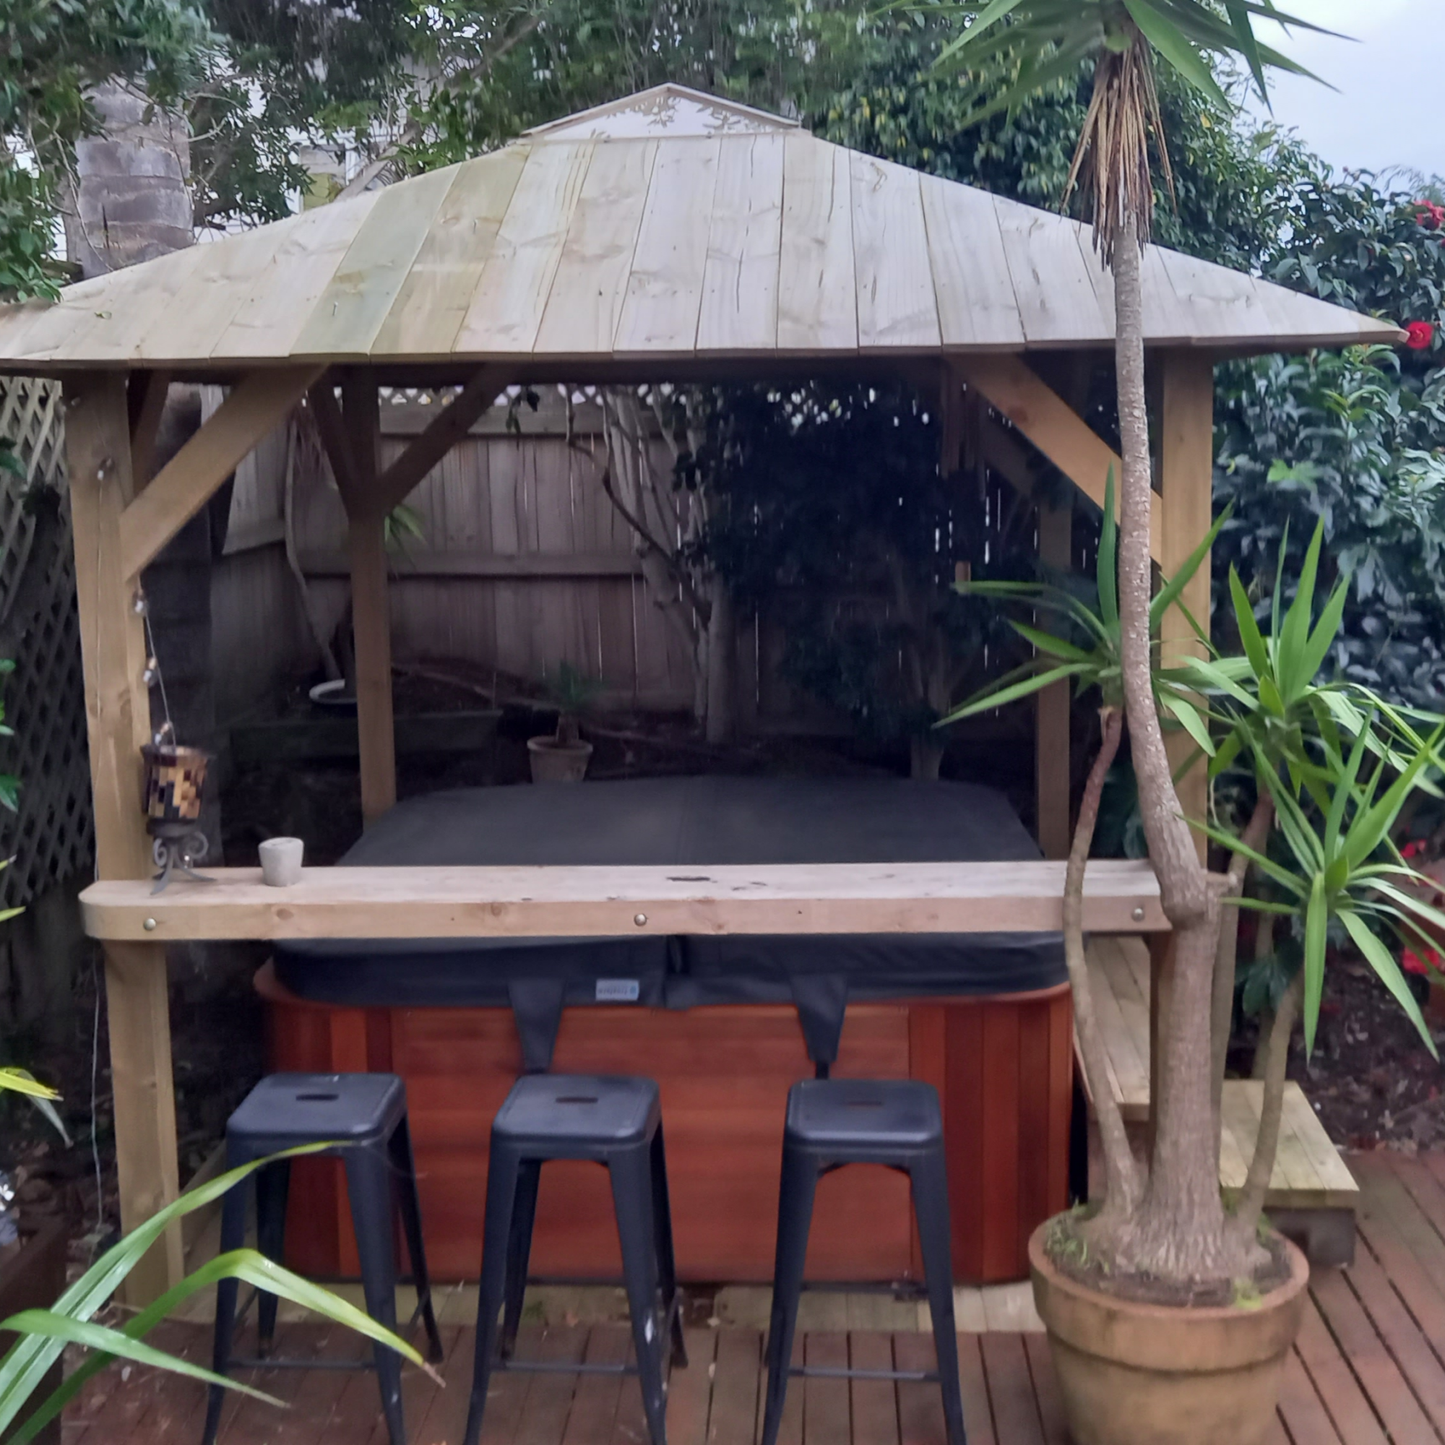 DIY plans to build a rustic 8ft square gazebo suitable for a hot-tub enclosure